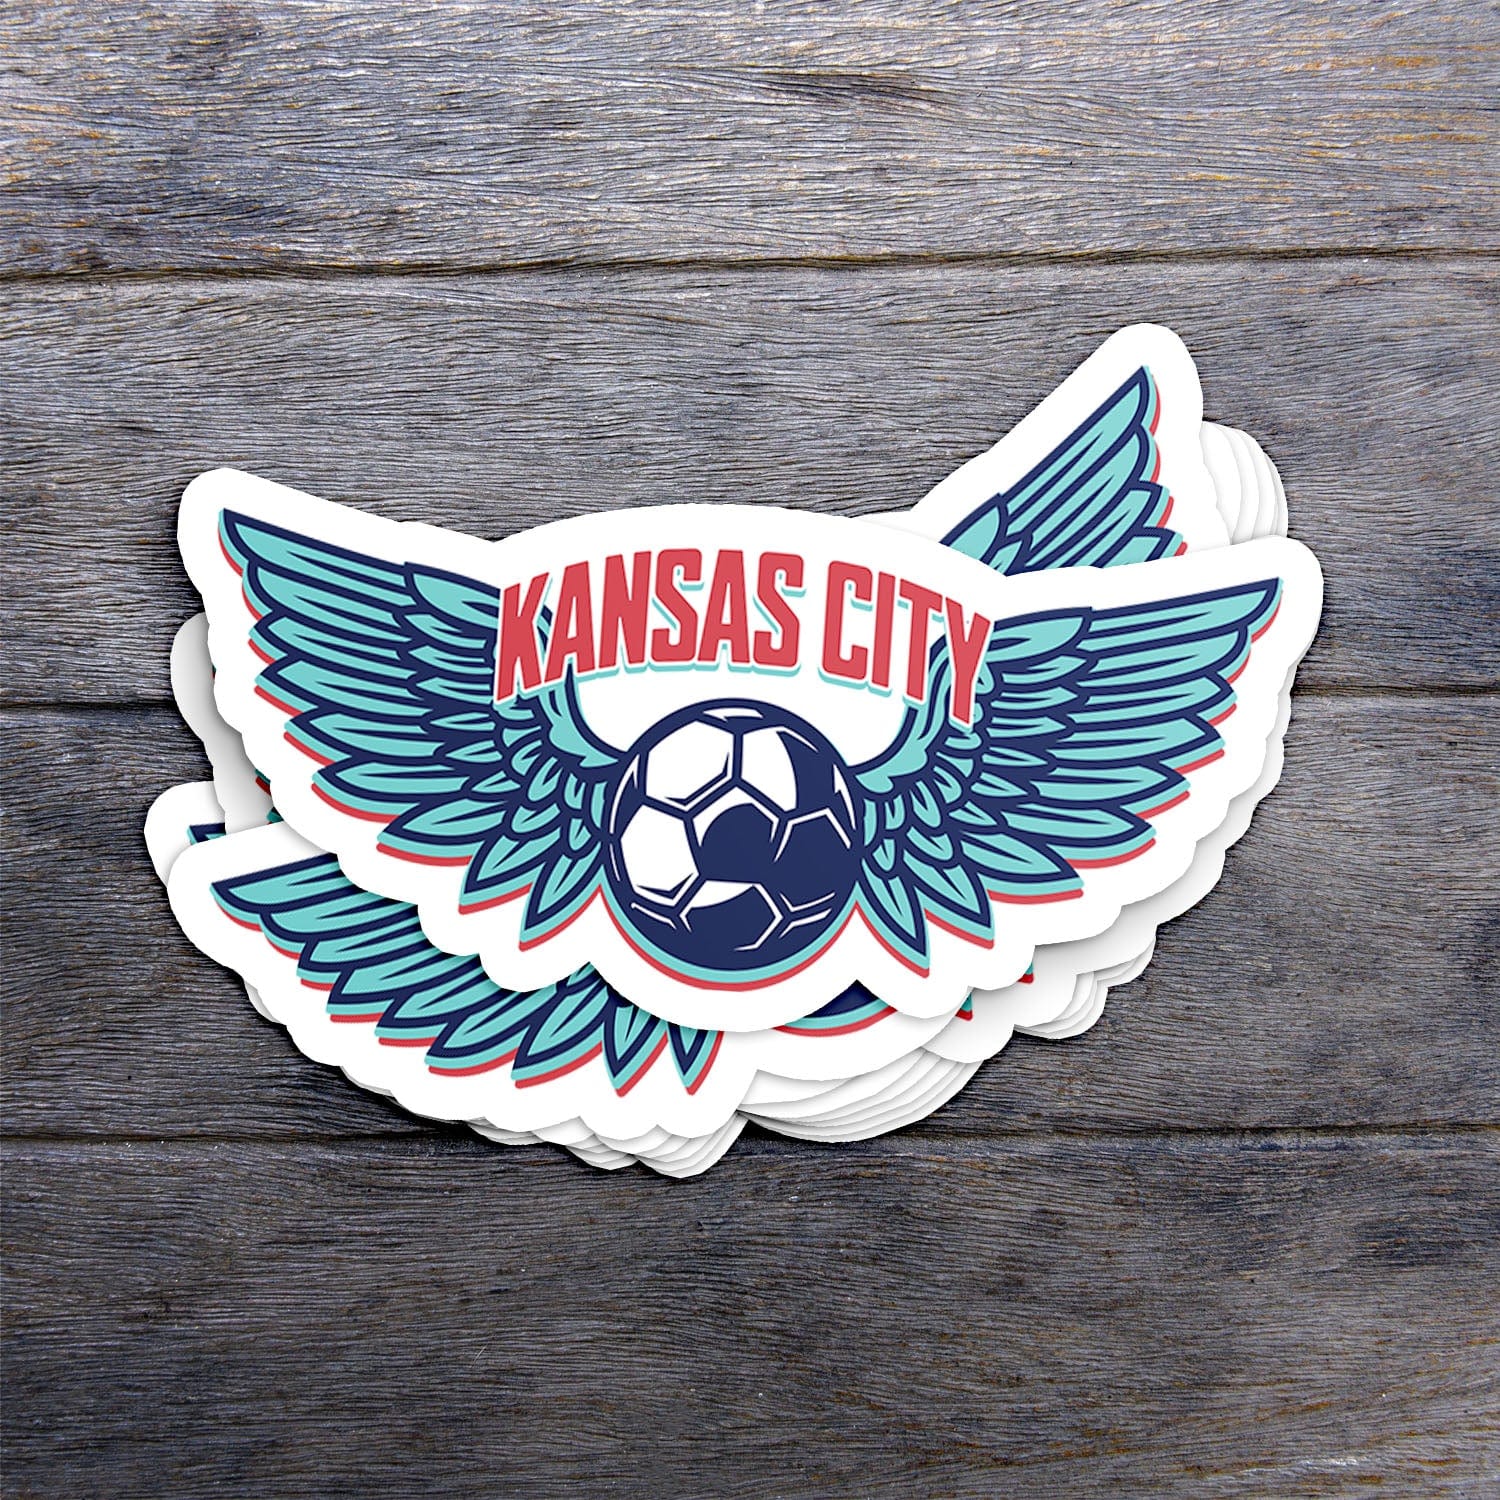 KC Swag Kansas City Current KC WING BALL die-cut sticker decal made from waterproof vinyl stack on dark wood table